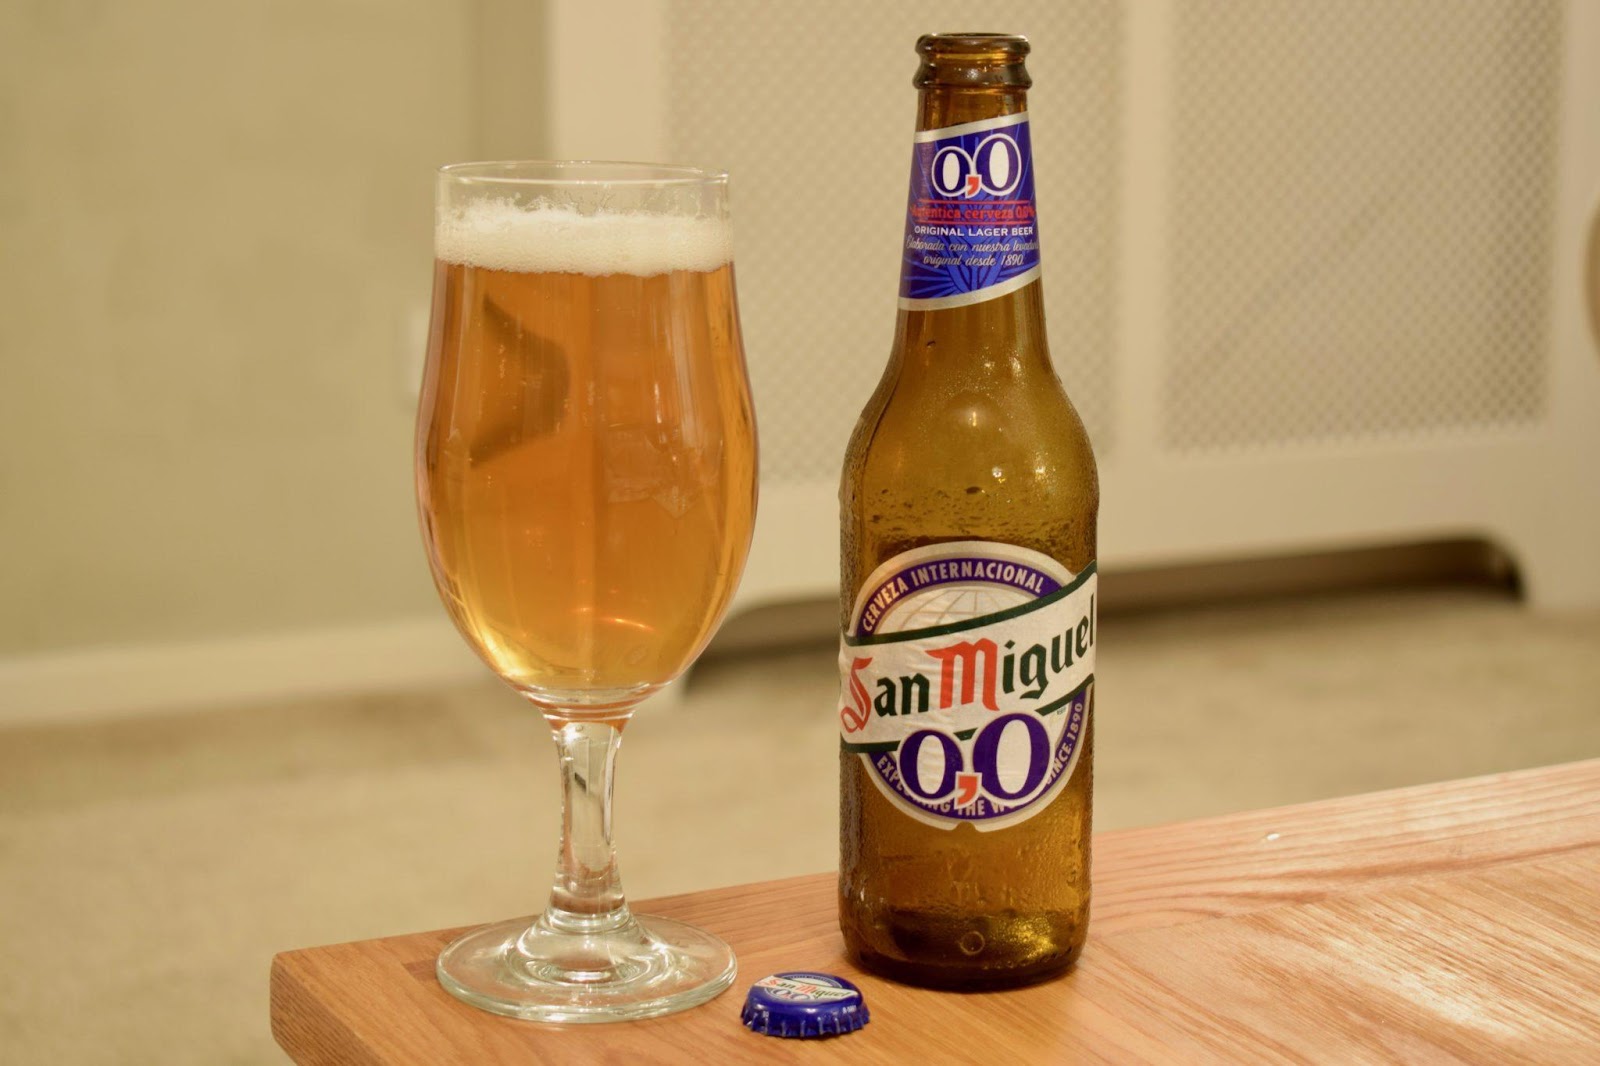 San Miguel 0% Alcohol Beer and glass on a wooden table